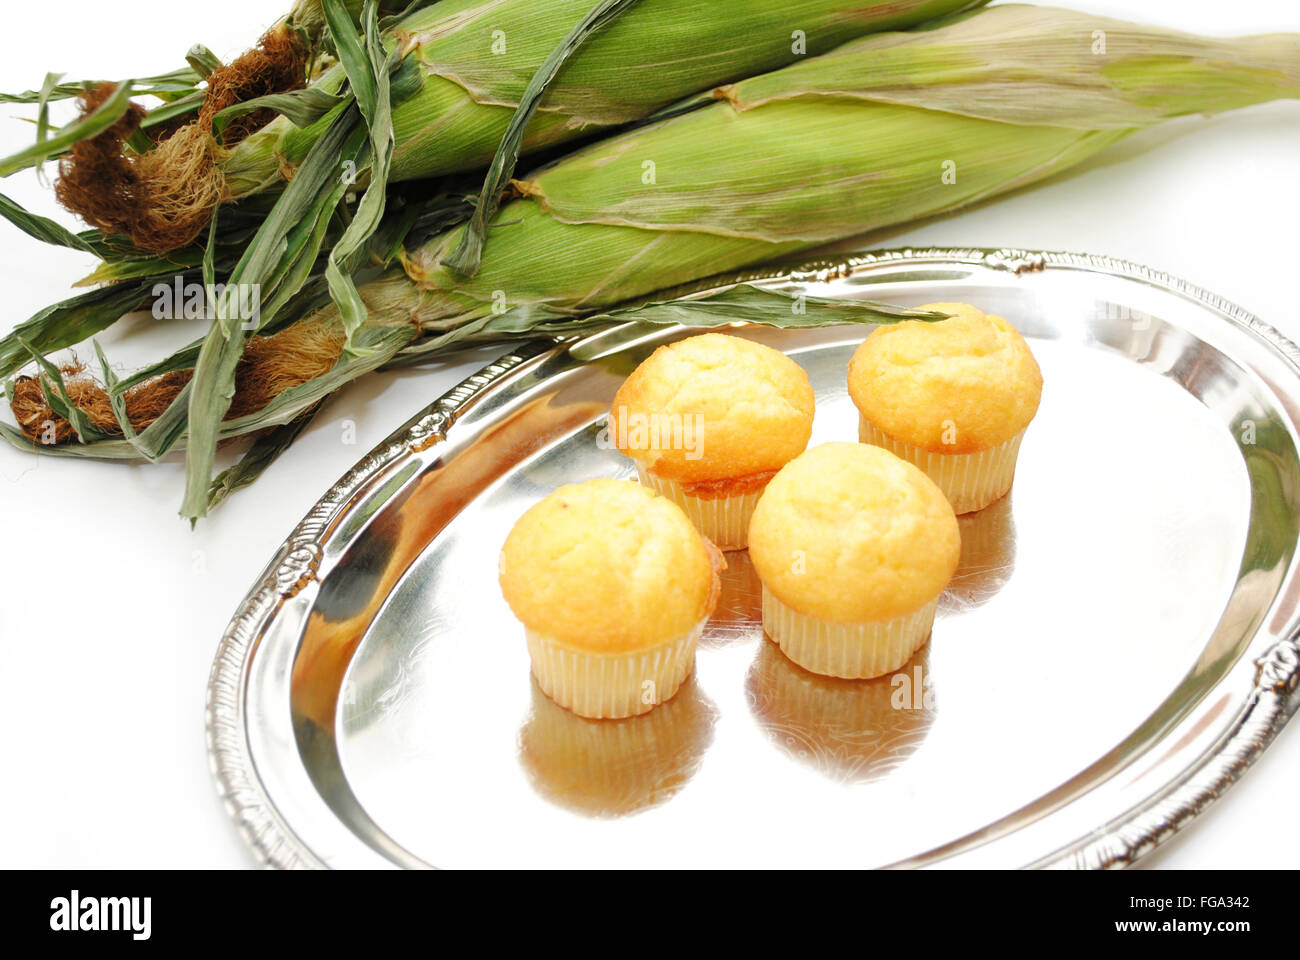 Four Delicious Corn Muffins on a Silver Platter Stock Photo